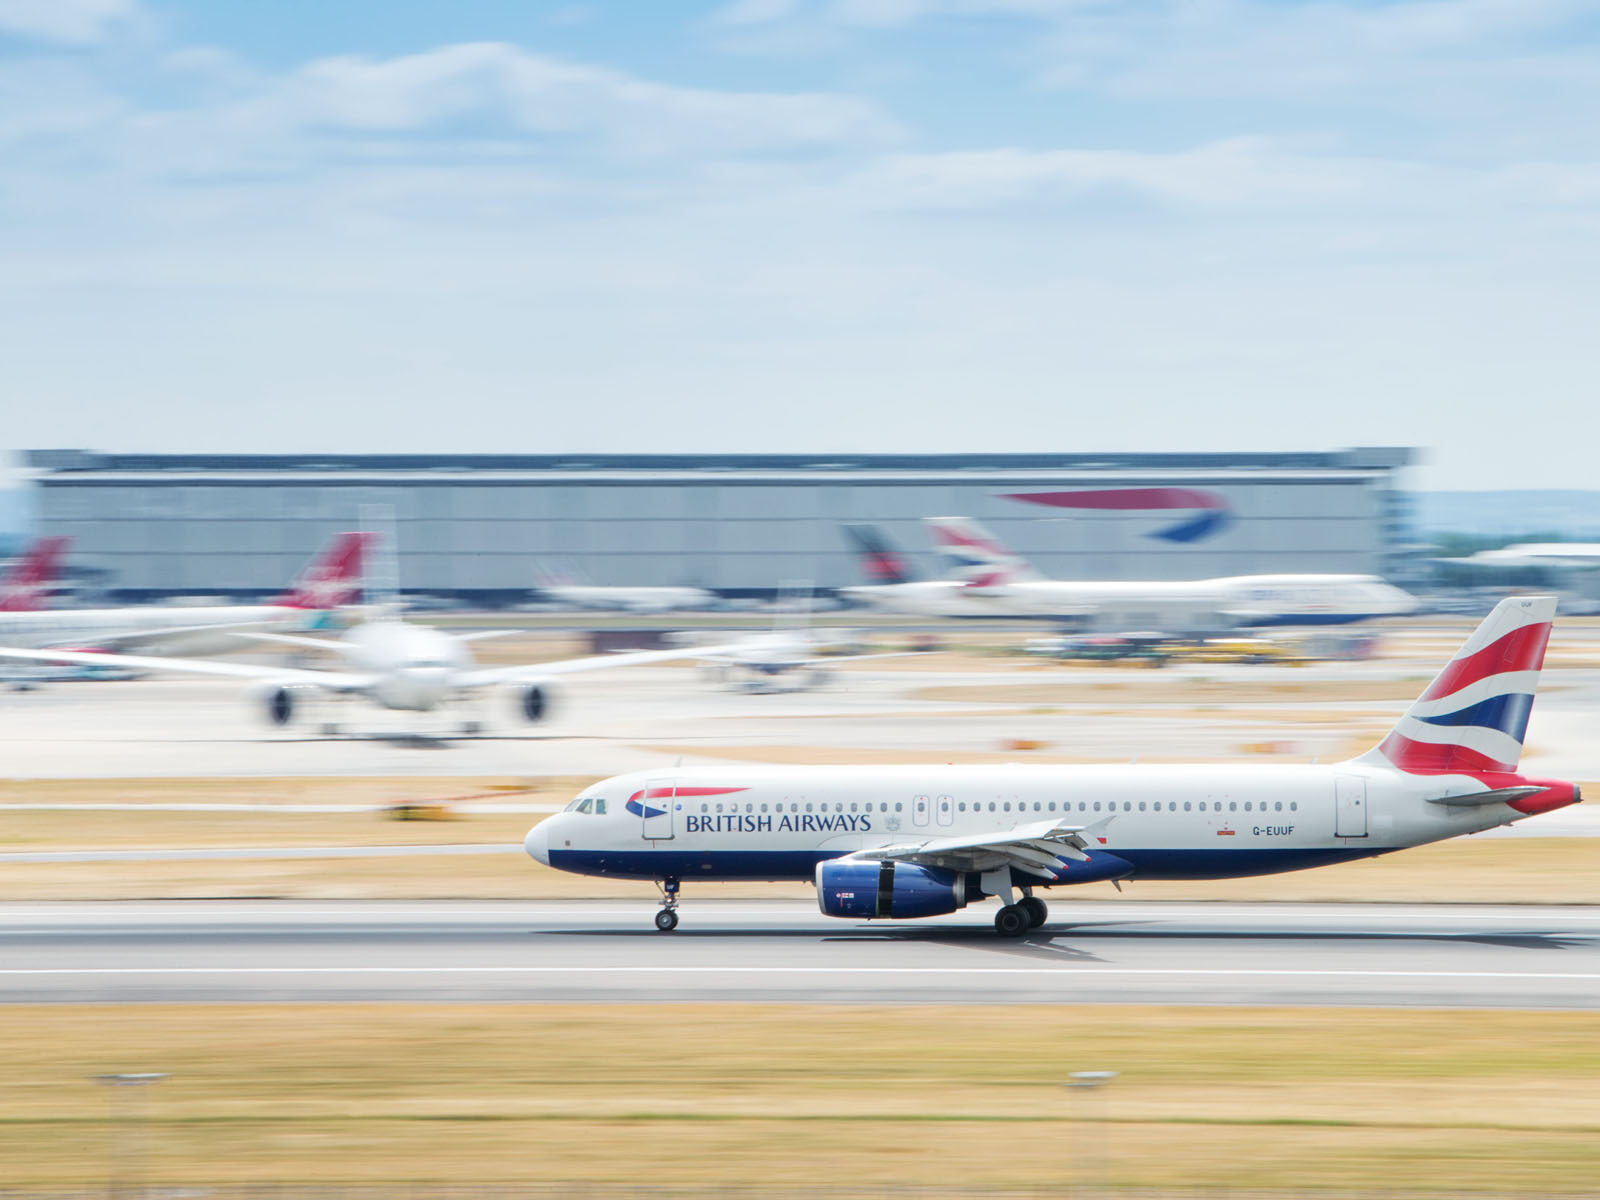 NATS Technology to Prioritise Environmental Performance at Heathrow